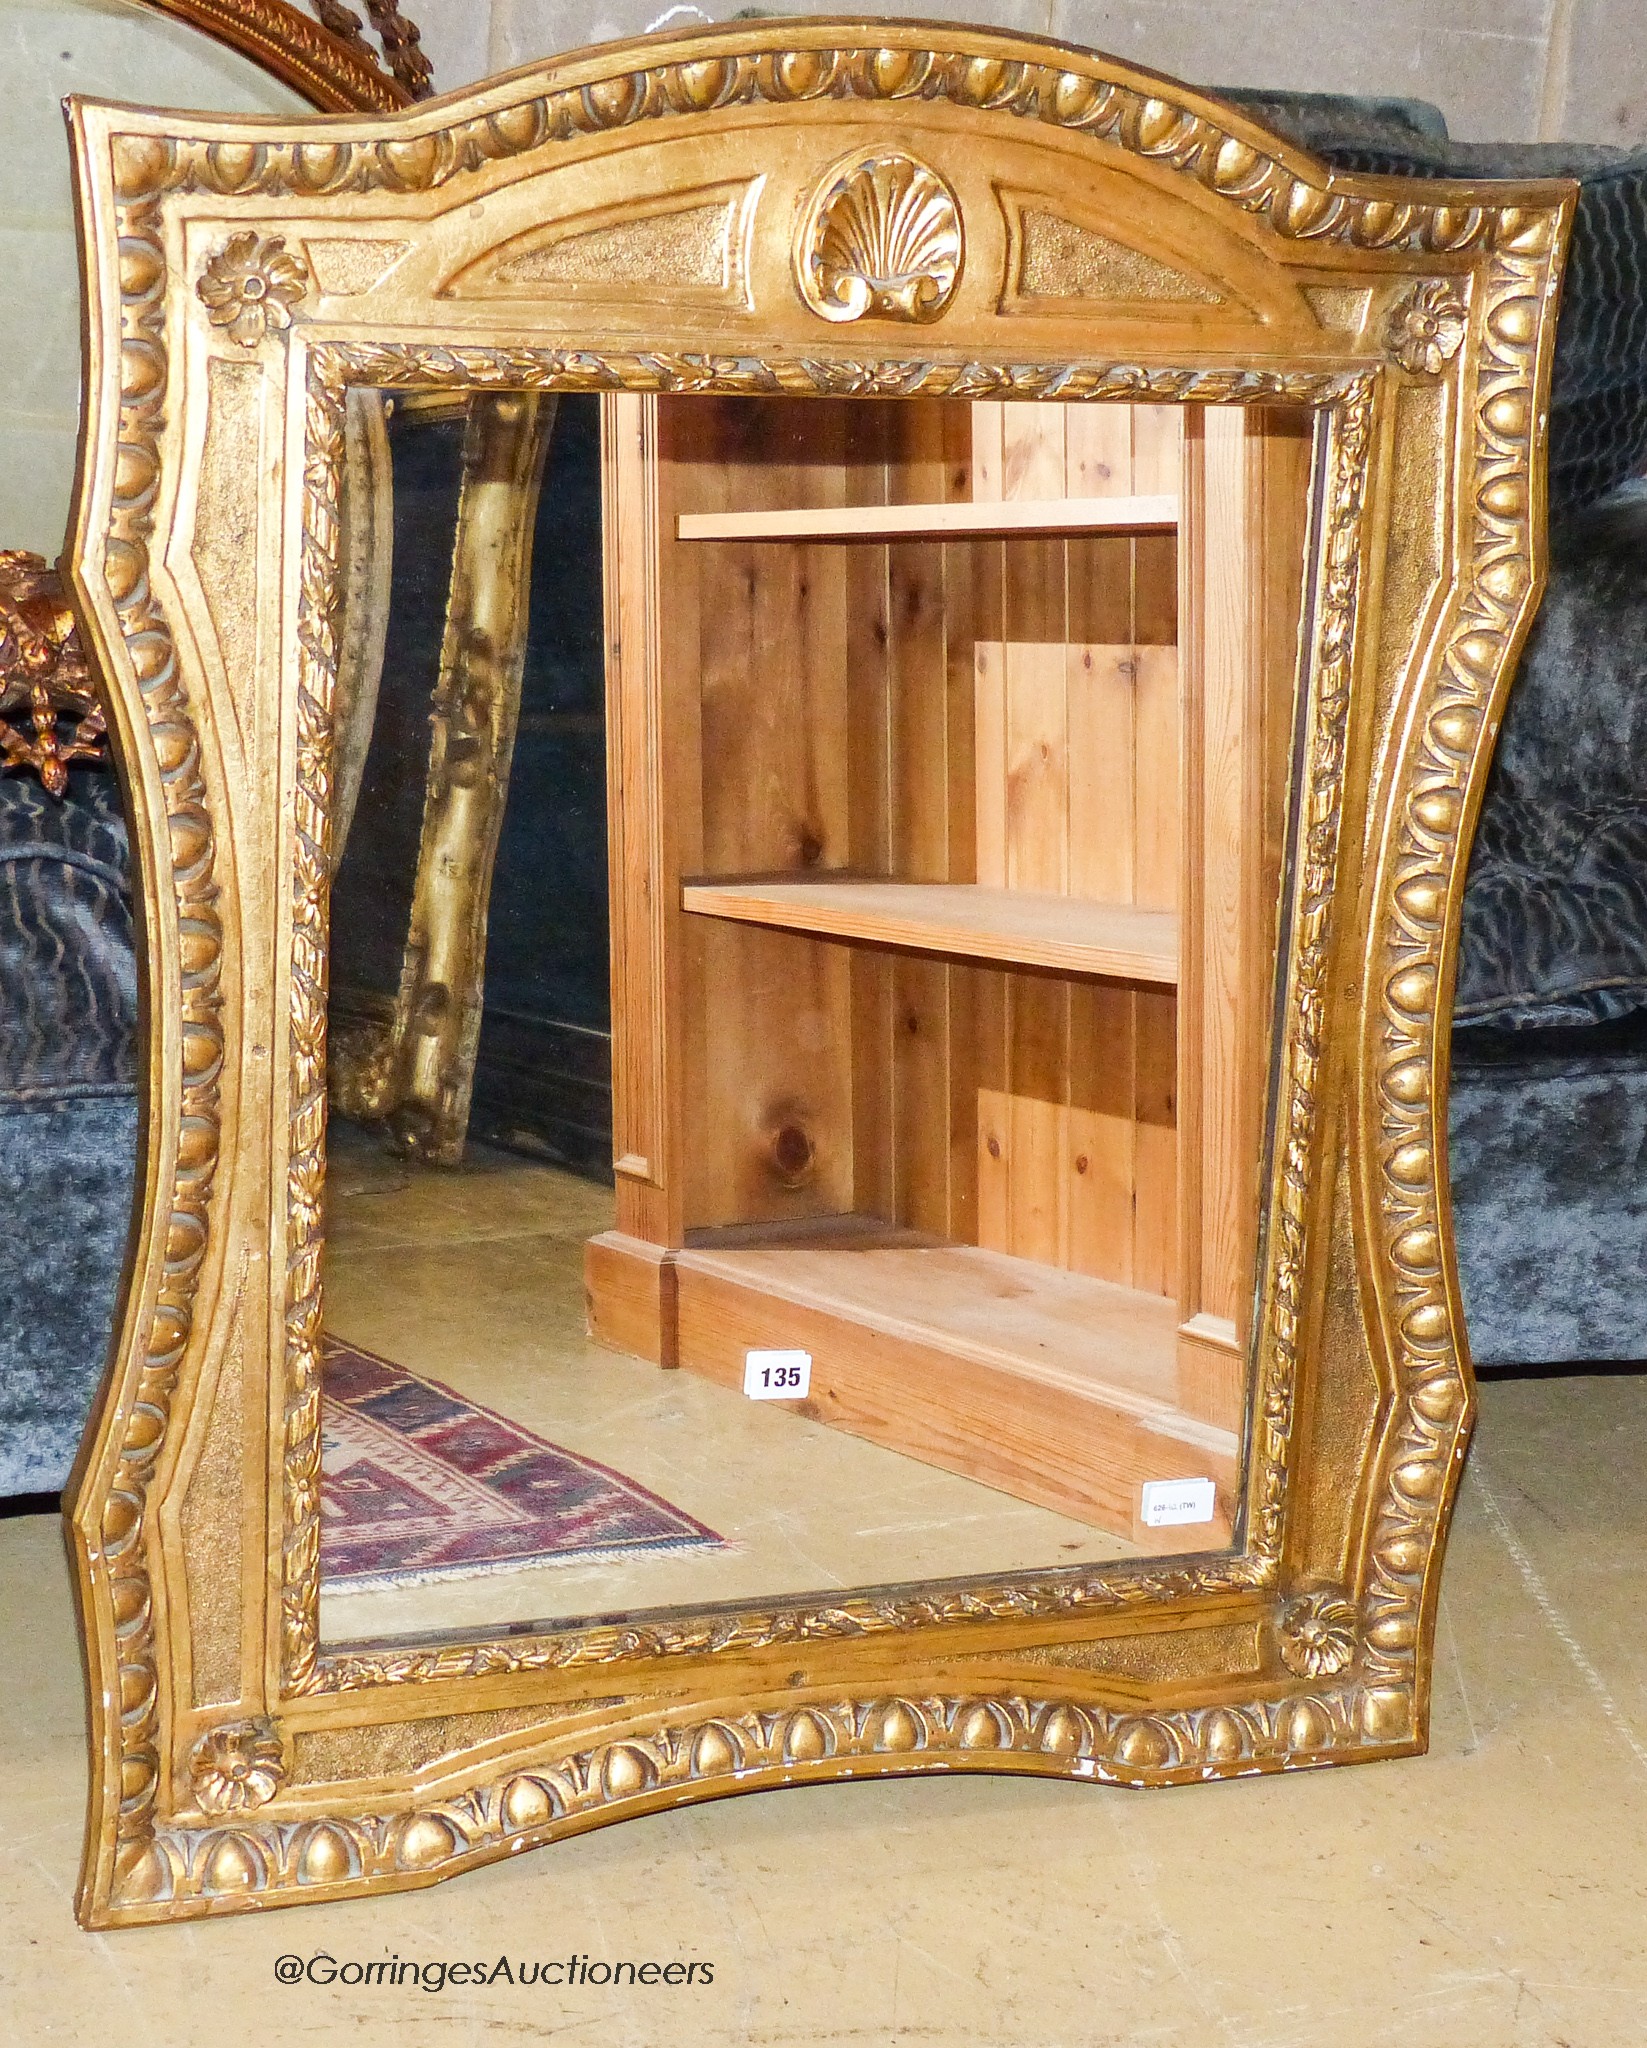 A gilt composition wall mirror in 18th century style                                                                                                                                                                        